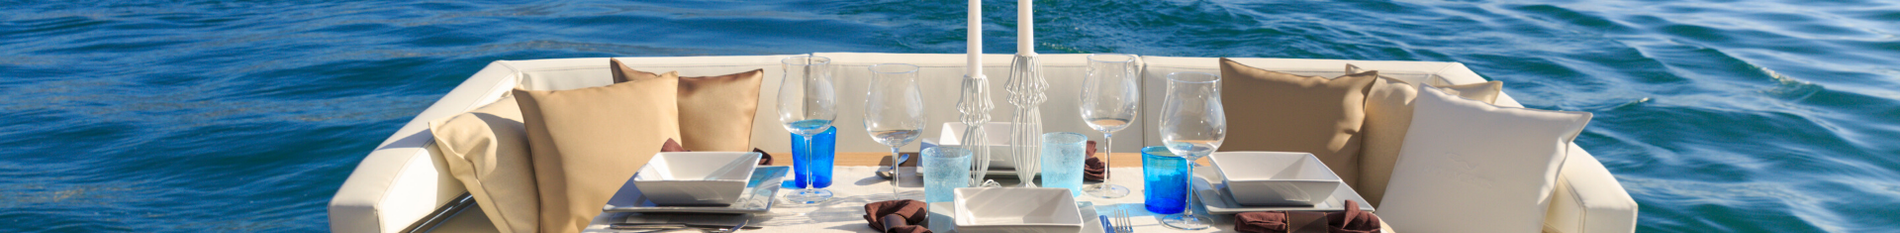 Blog-Banner-how-to-stock-a-superyacht-supplies-for-yacht-chefs-and-stewardesses